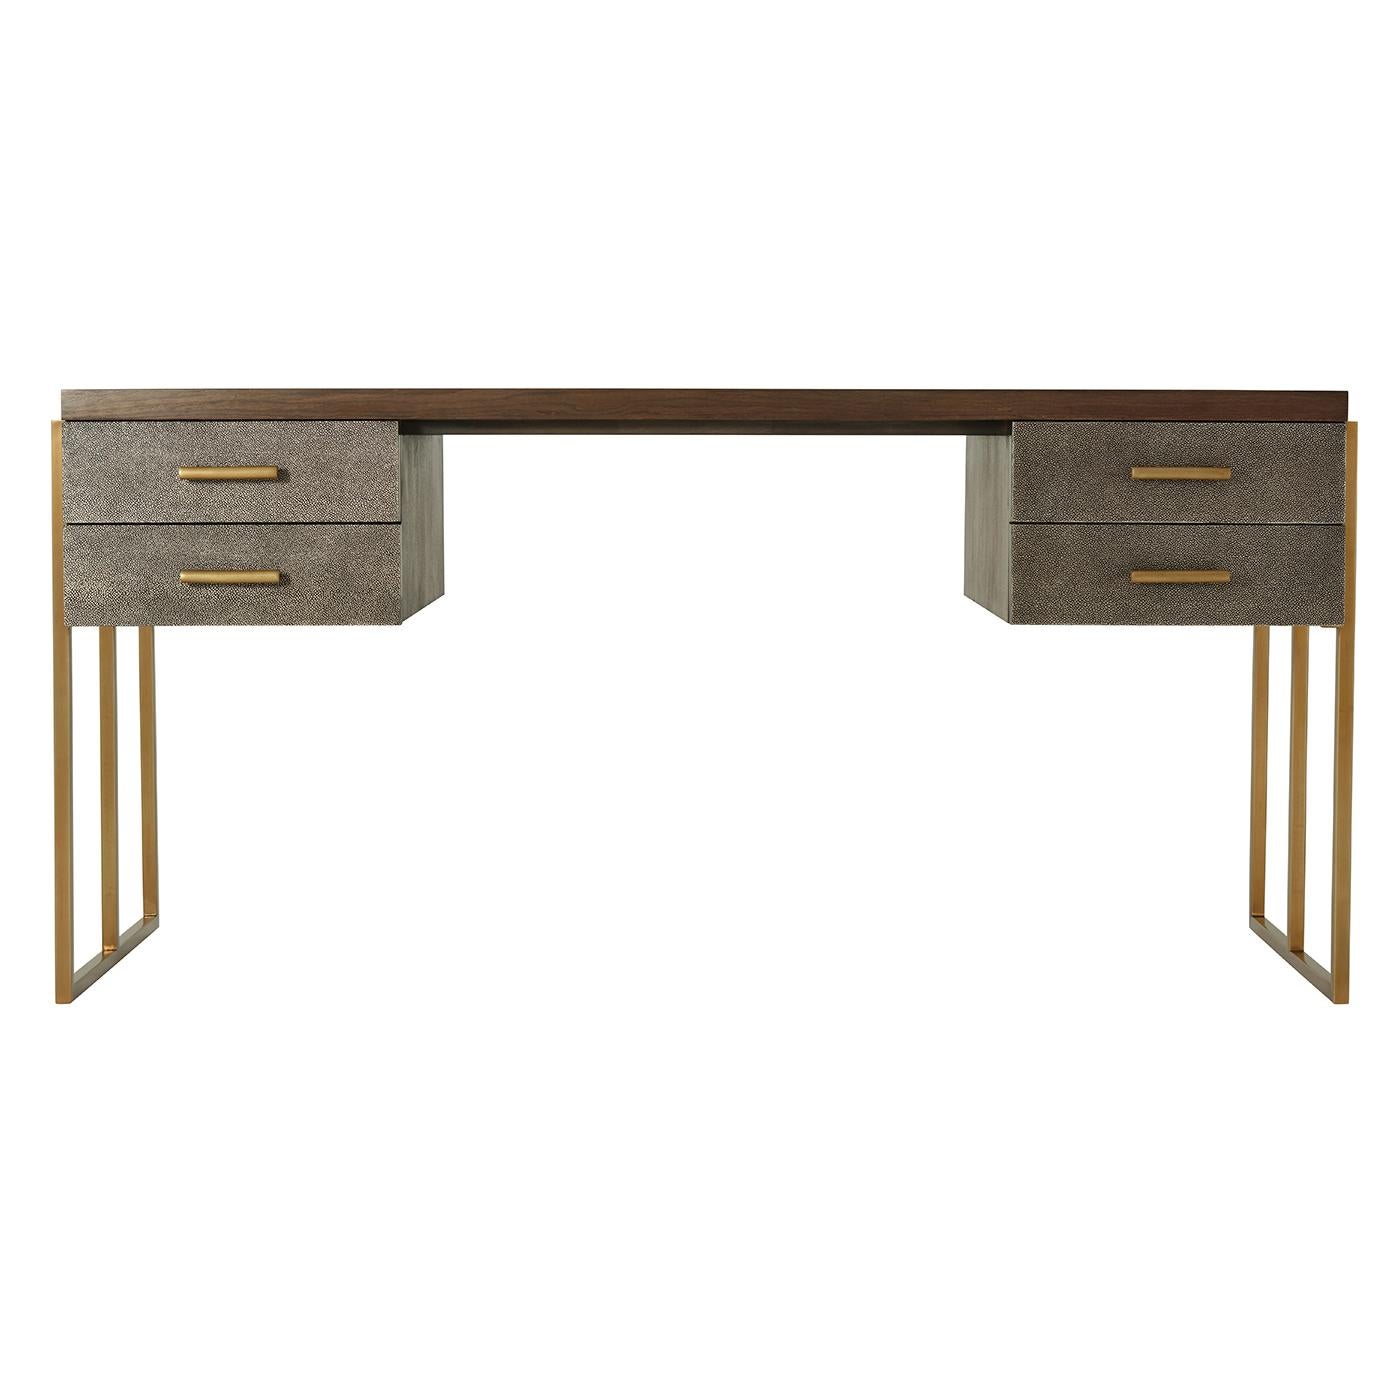 Modern desk with rectangular starburst veneered walnut grain top with a Macadamia finish, four shagreen inlaid drawers with brushed brass handles and side supports.

Dimensions: 63